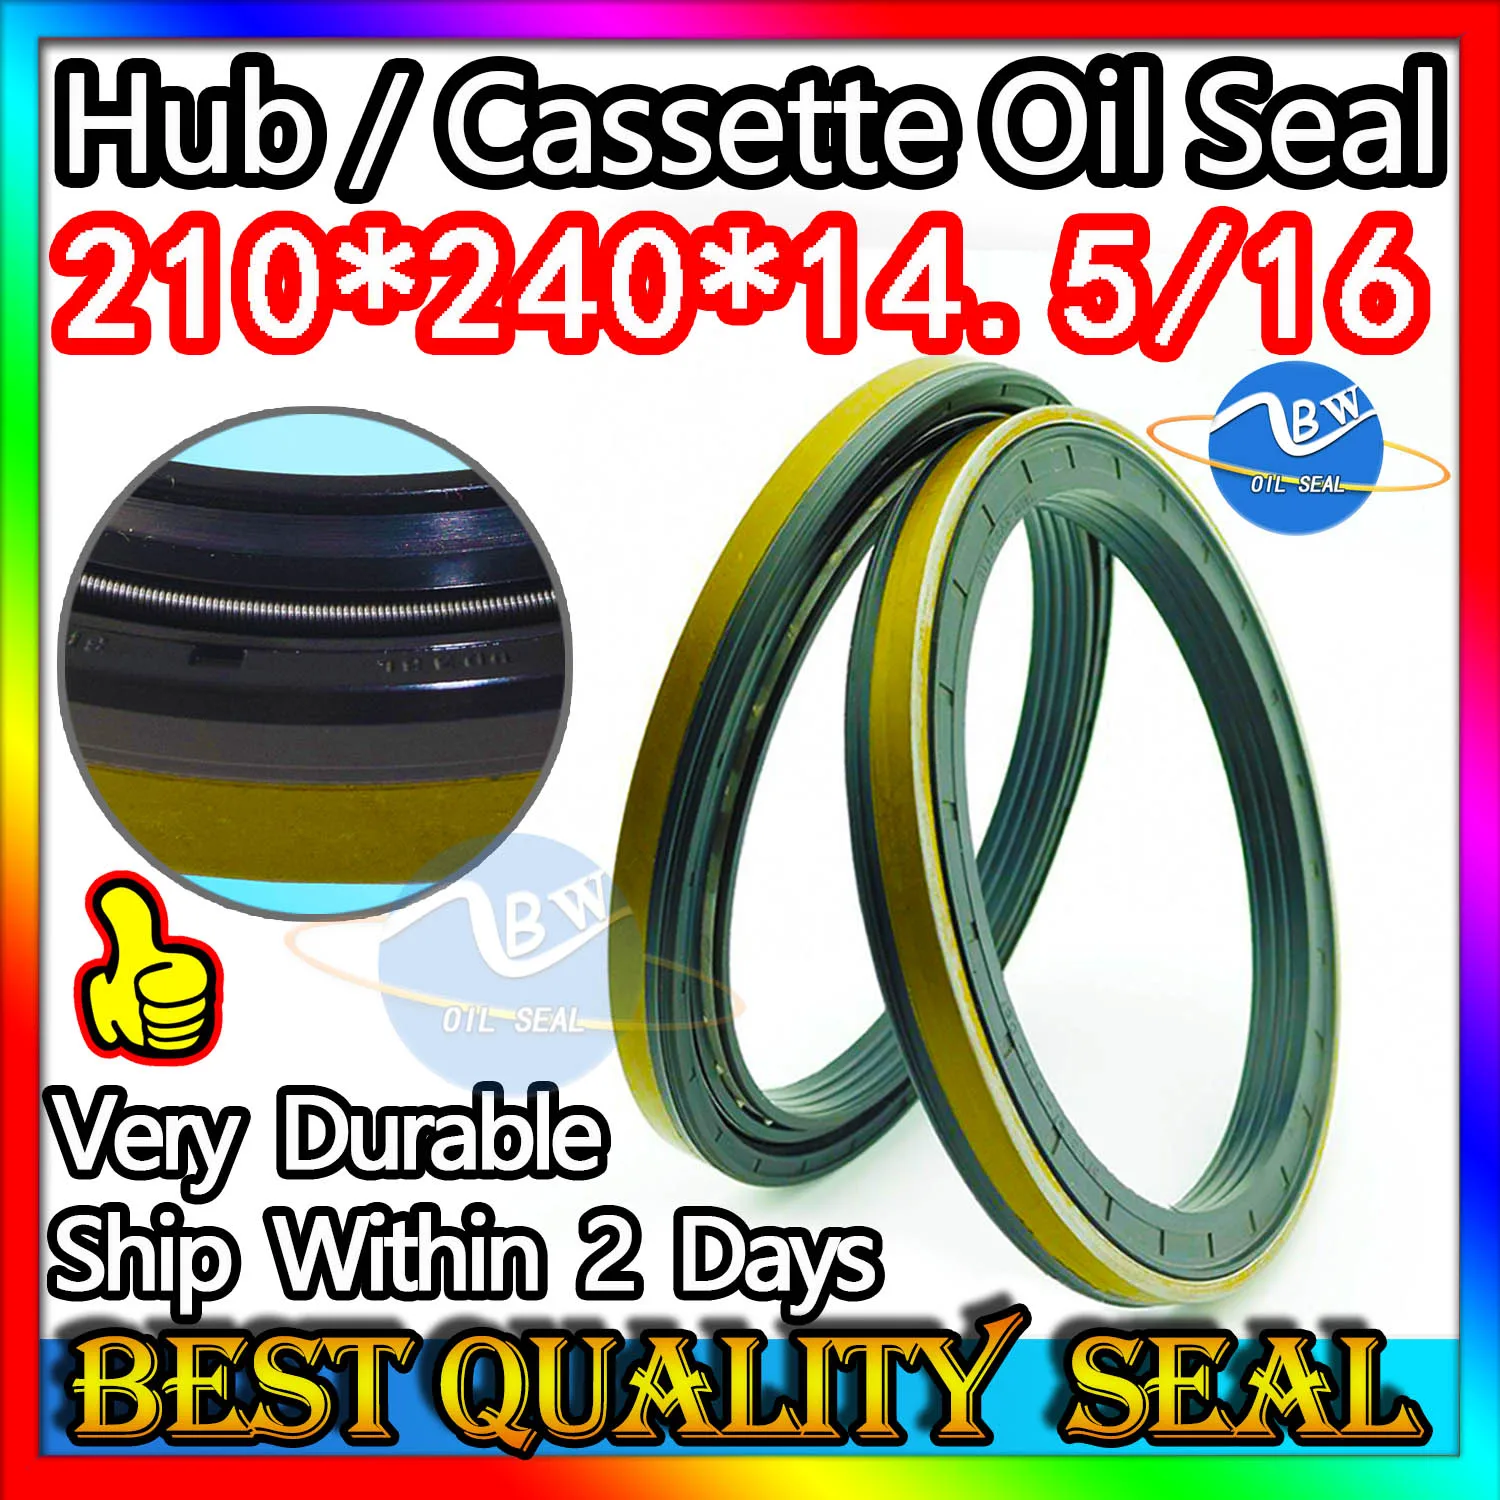 

Cassette Oil Seal 210*240*14.5/16 Hub Oil Sealing For Tractor Cat 210X240X14.5/16 Motor FKM Combined New Holland High Quality